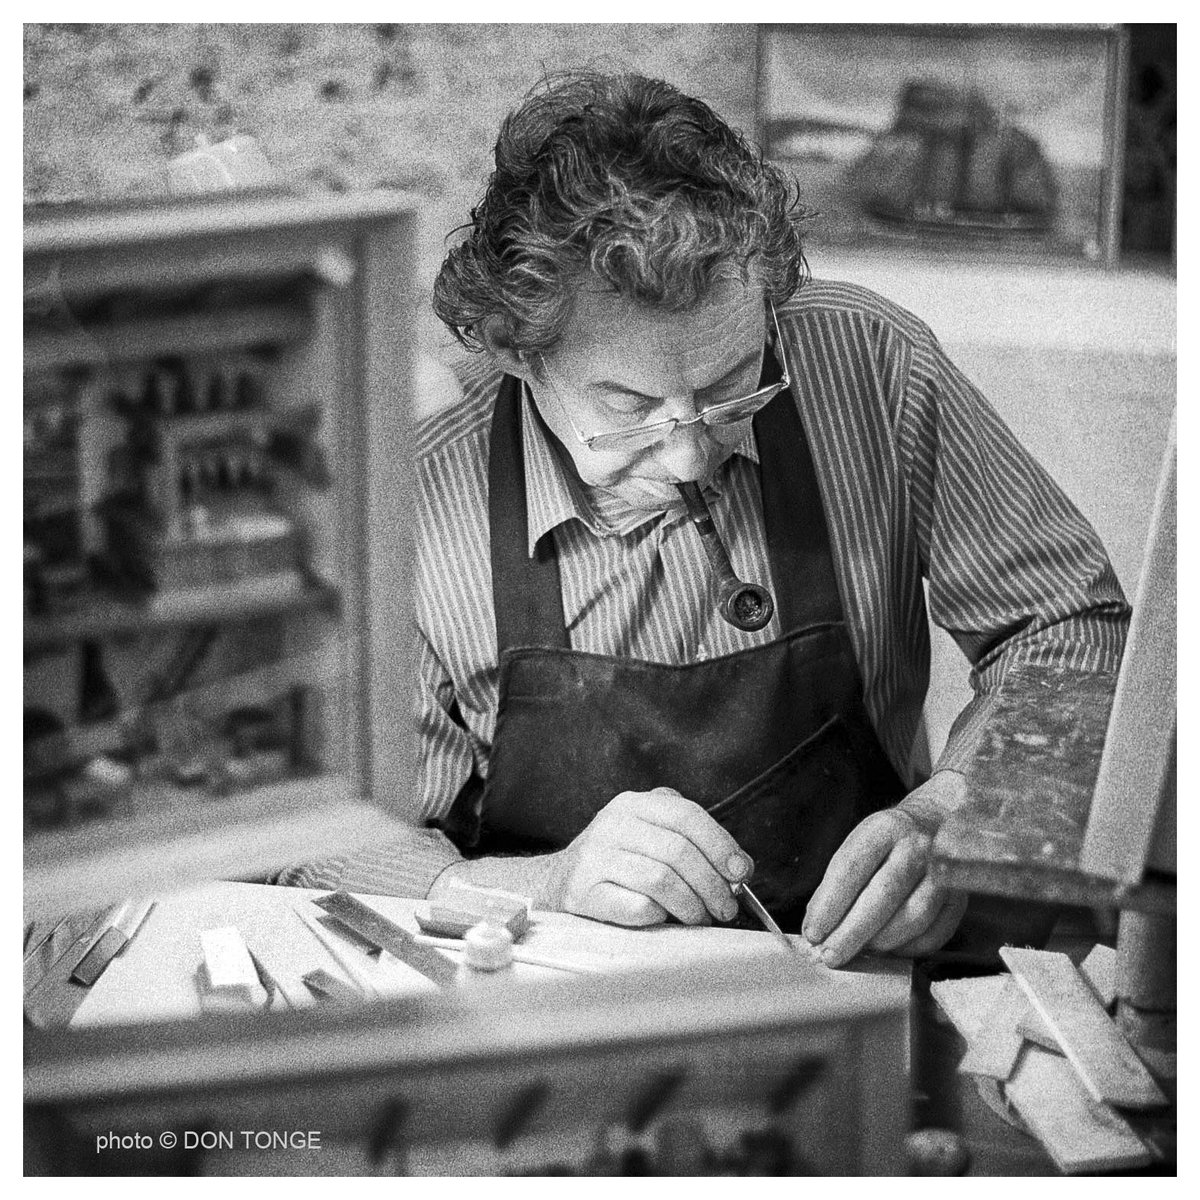 I photographed this craft model maker chap somewhere in or very close to Bolton, Lancashire, England UK Can anyone add any more information! #britishculturearchive #caferoyalbooks #fistfulofbooks #framesmag etsy.com/uk/shop/DonTon… #blackandwhitephotography #monochrome